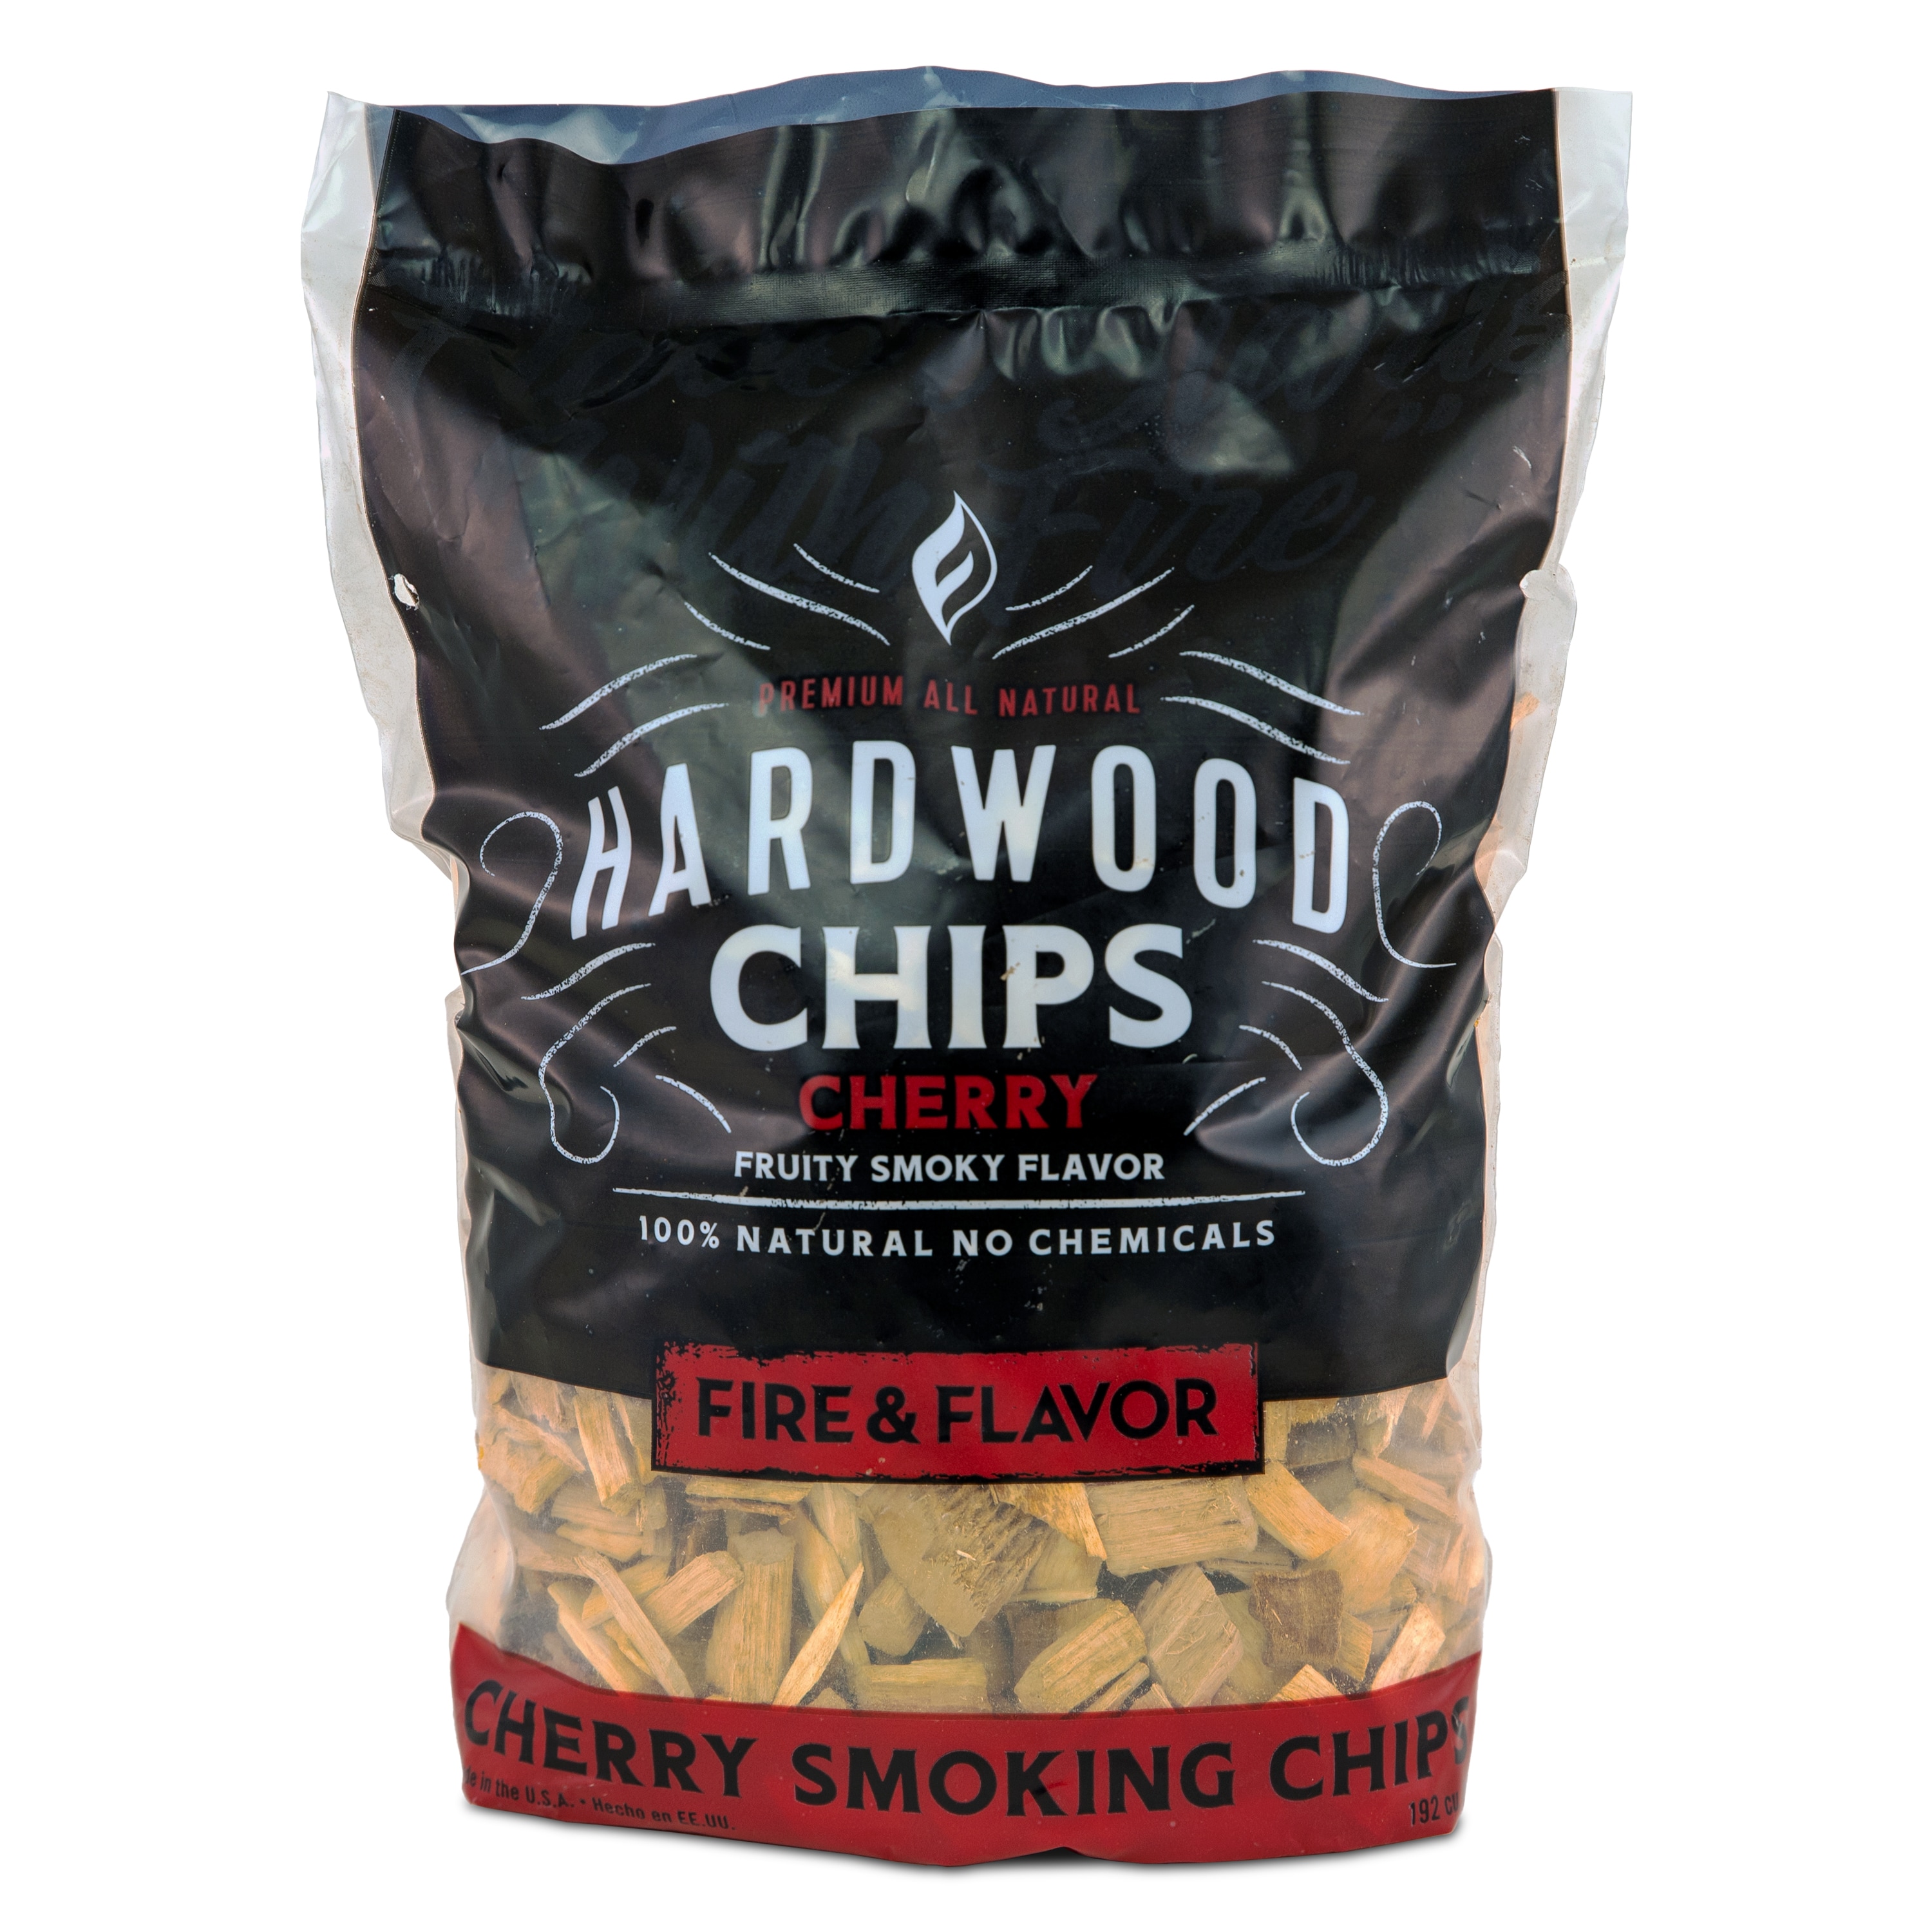 Fire & Flavor Premium All Natural Cherry Hardwood Smoking Chips, 2 Pounds